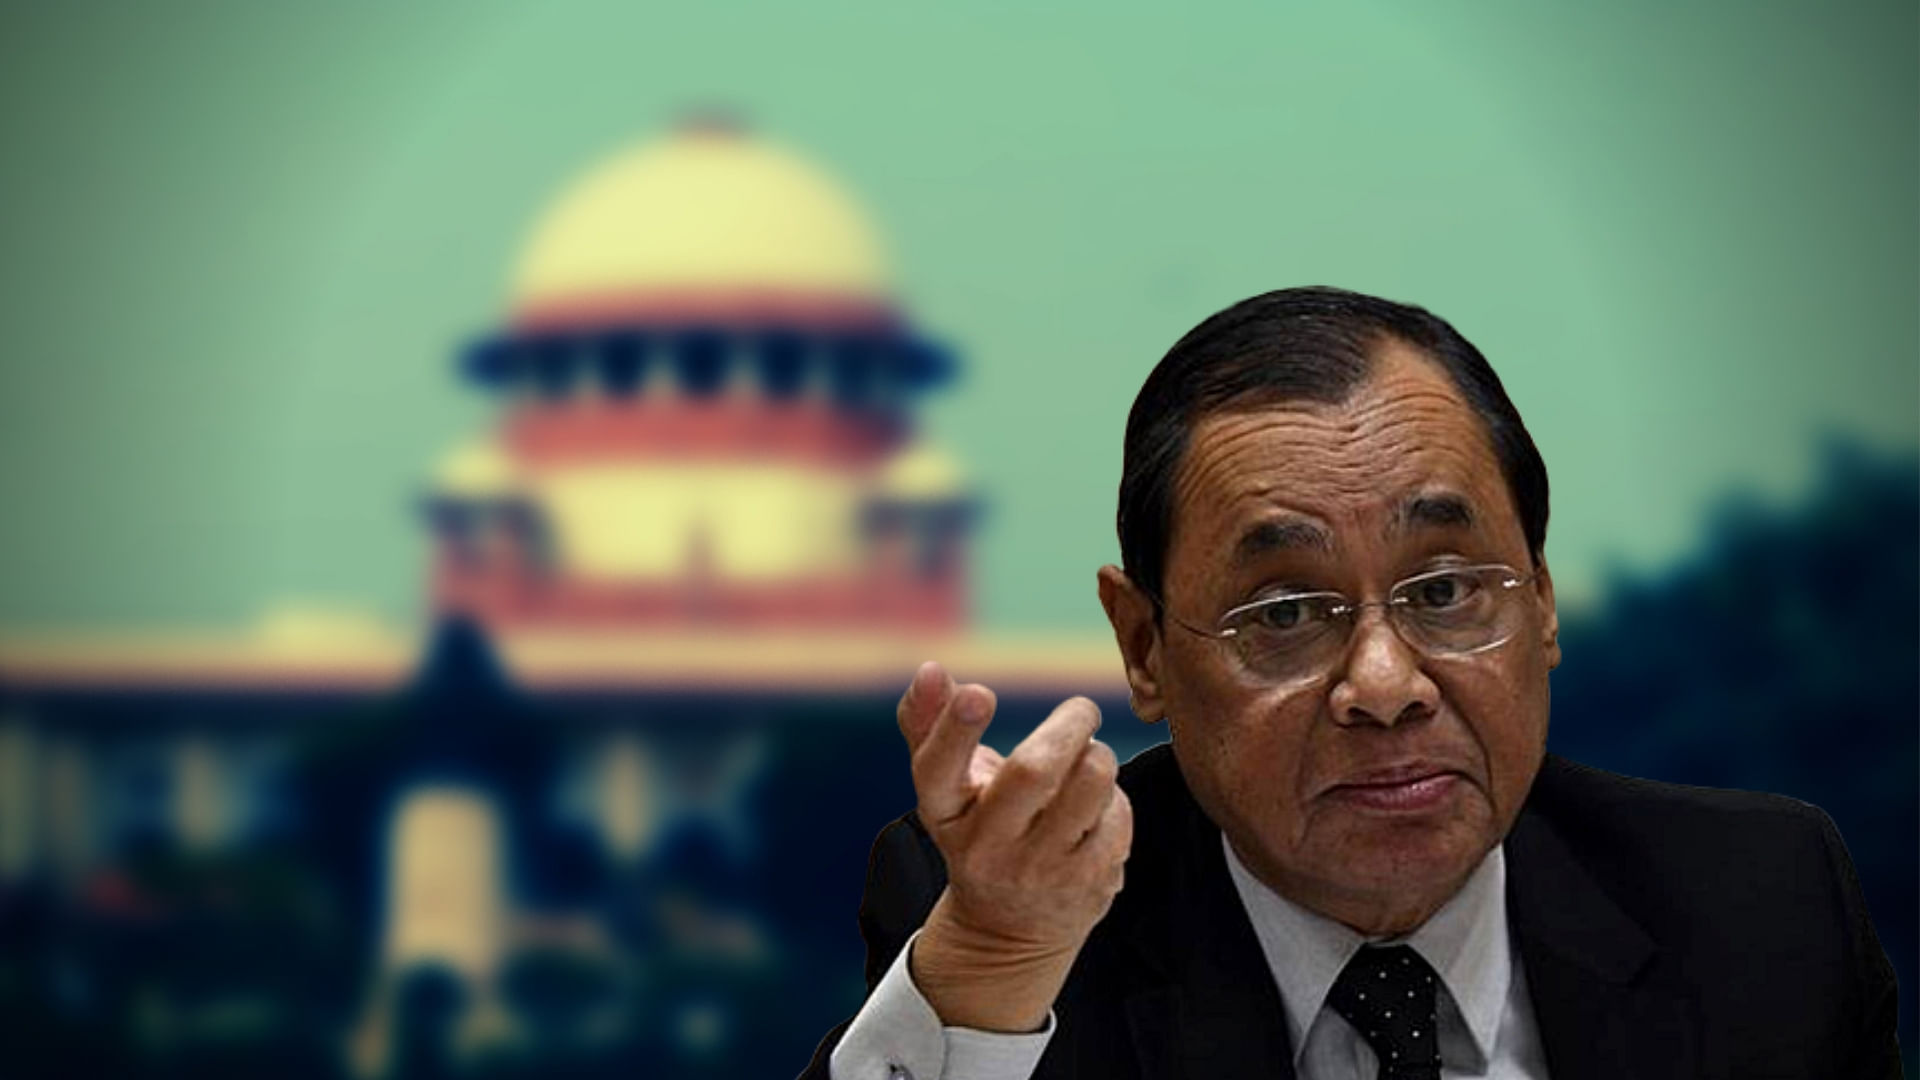 A woman has alleged that CJI Gogoi had made sexual advances on her while they were at his residence-office on 10 and 11 October last year.